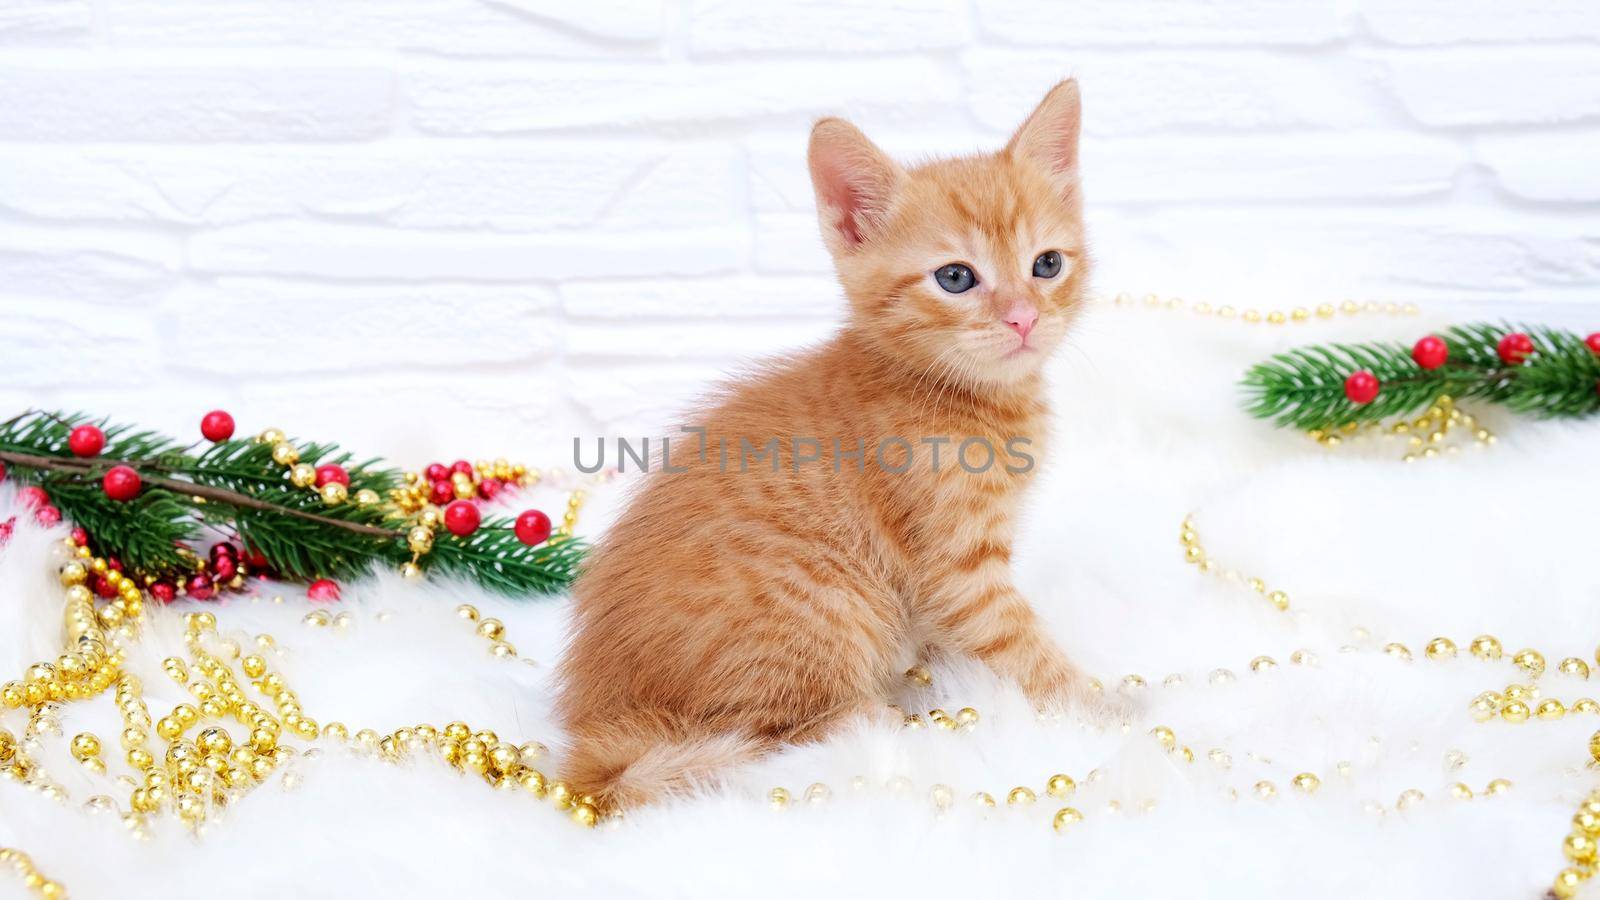 Ginger tabby playful curious christmas kitten sits next to christmas decorations, toys. Christmas and new year holidays concept.